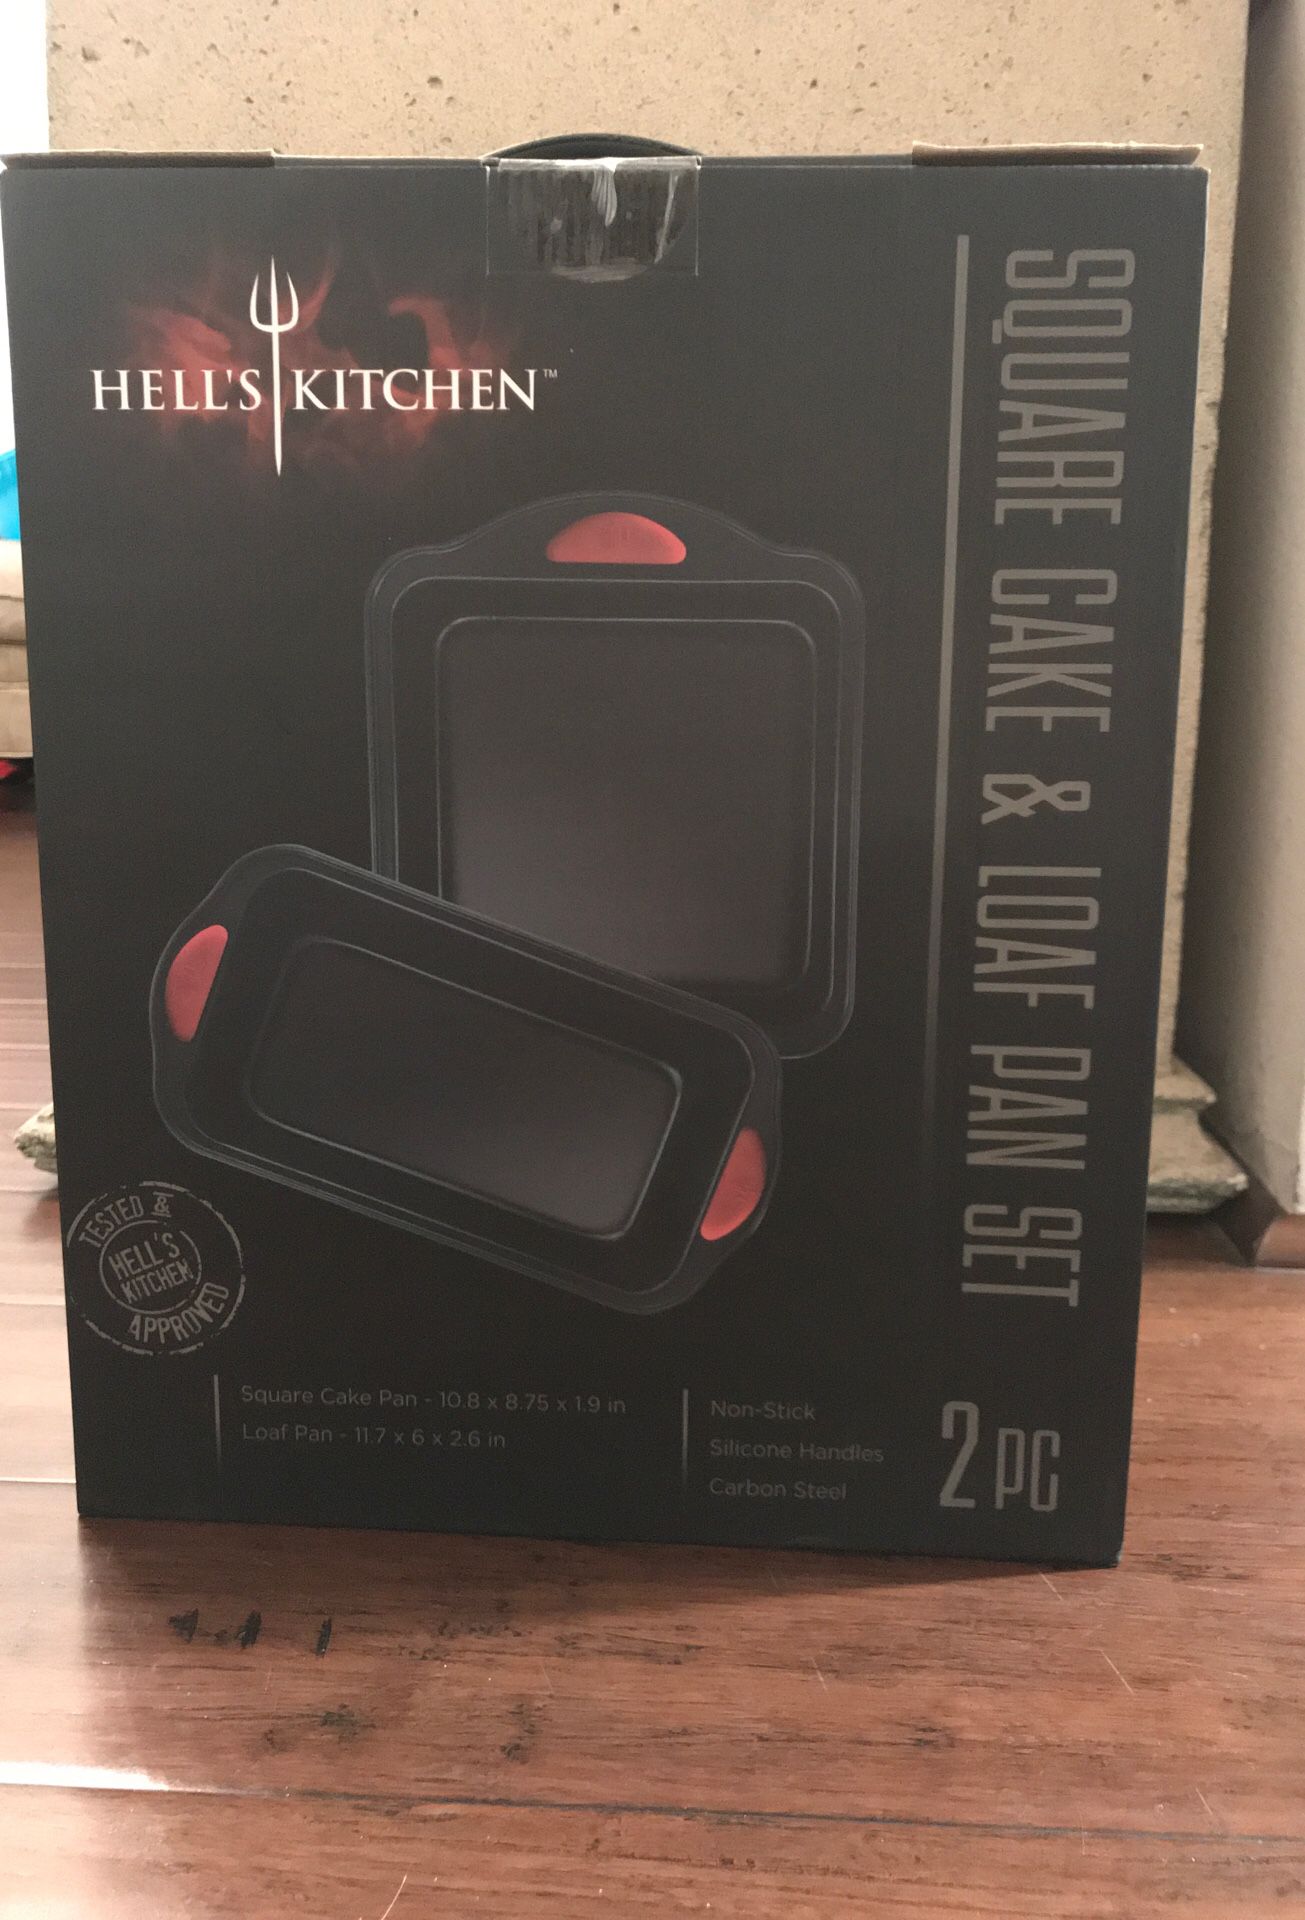 Hell’s Kitchen 2PC Square Cake & Loaf Pan Set